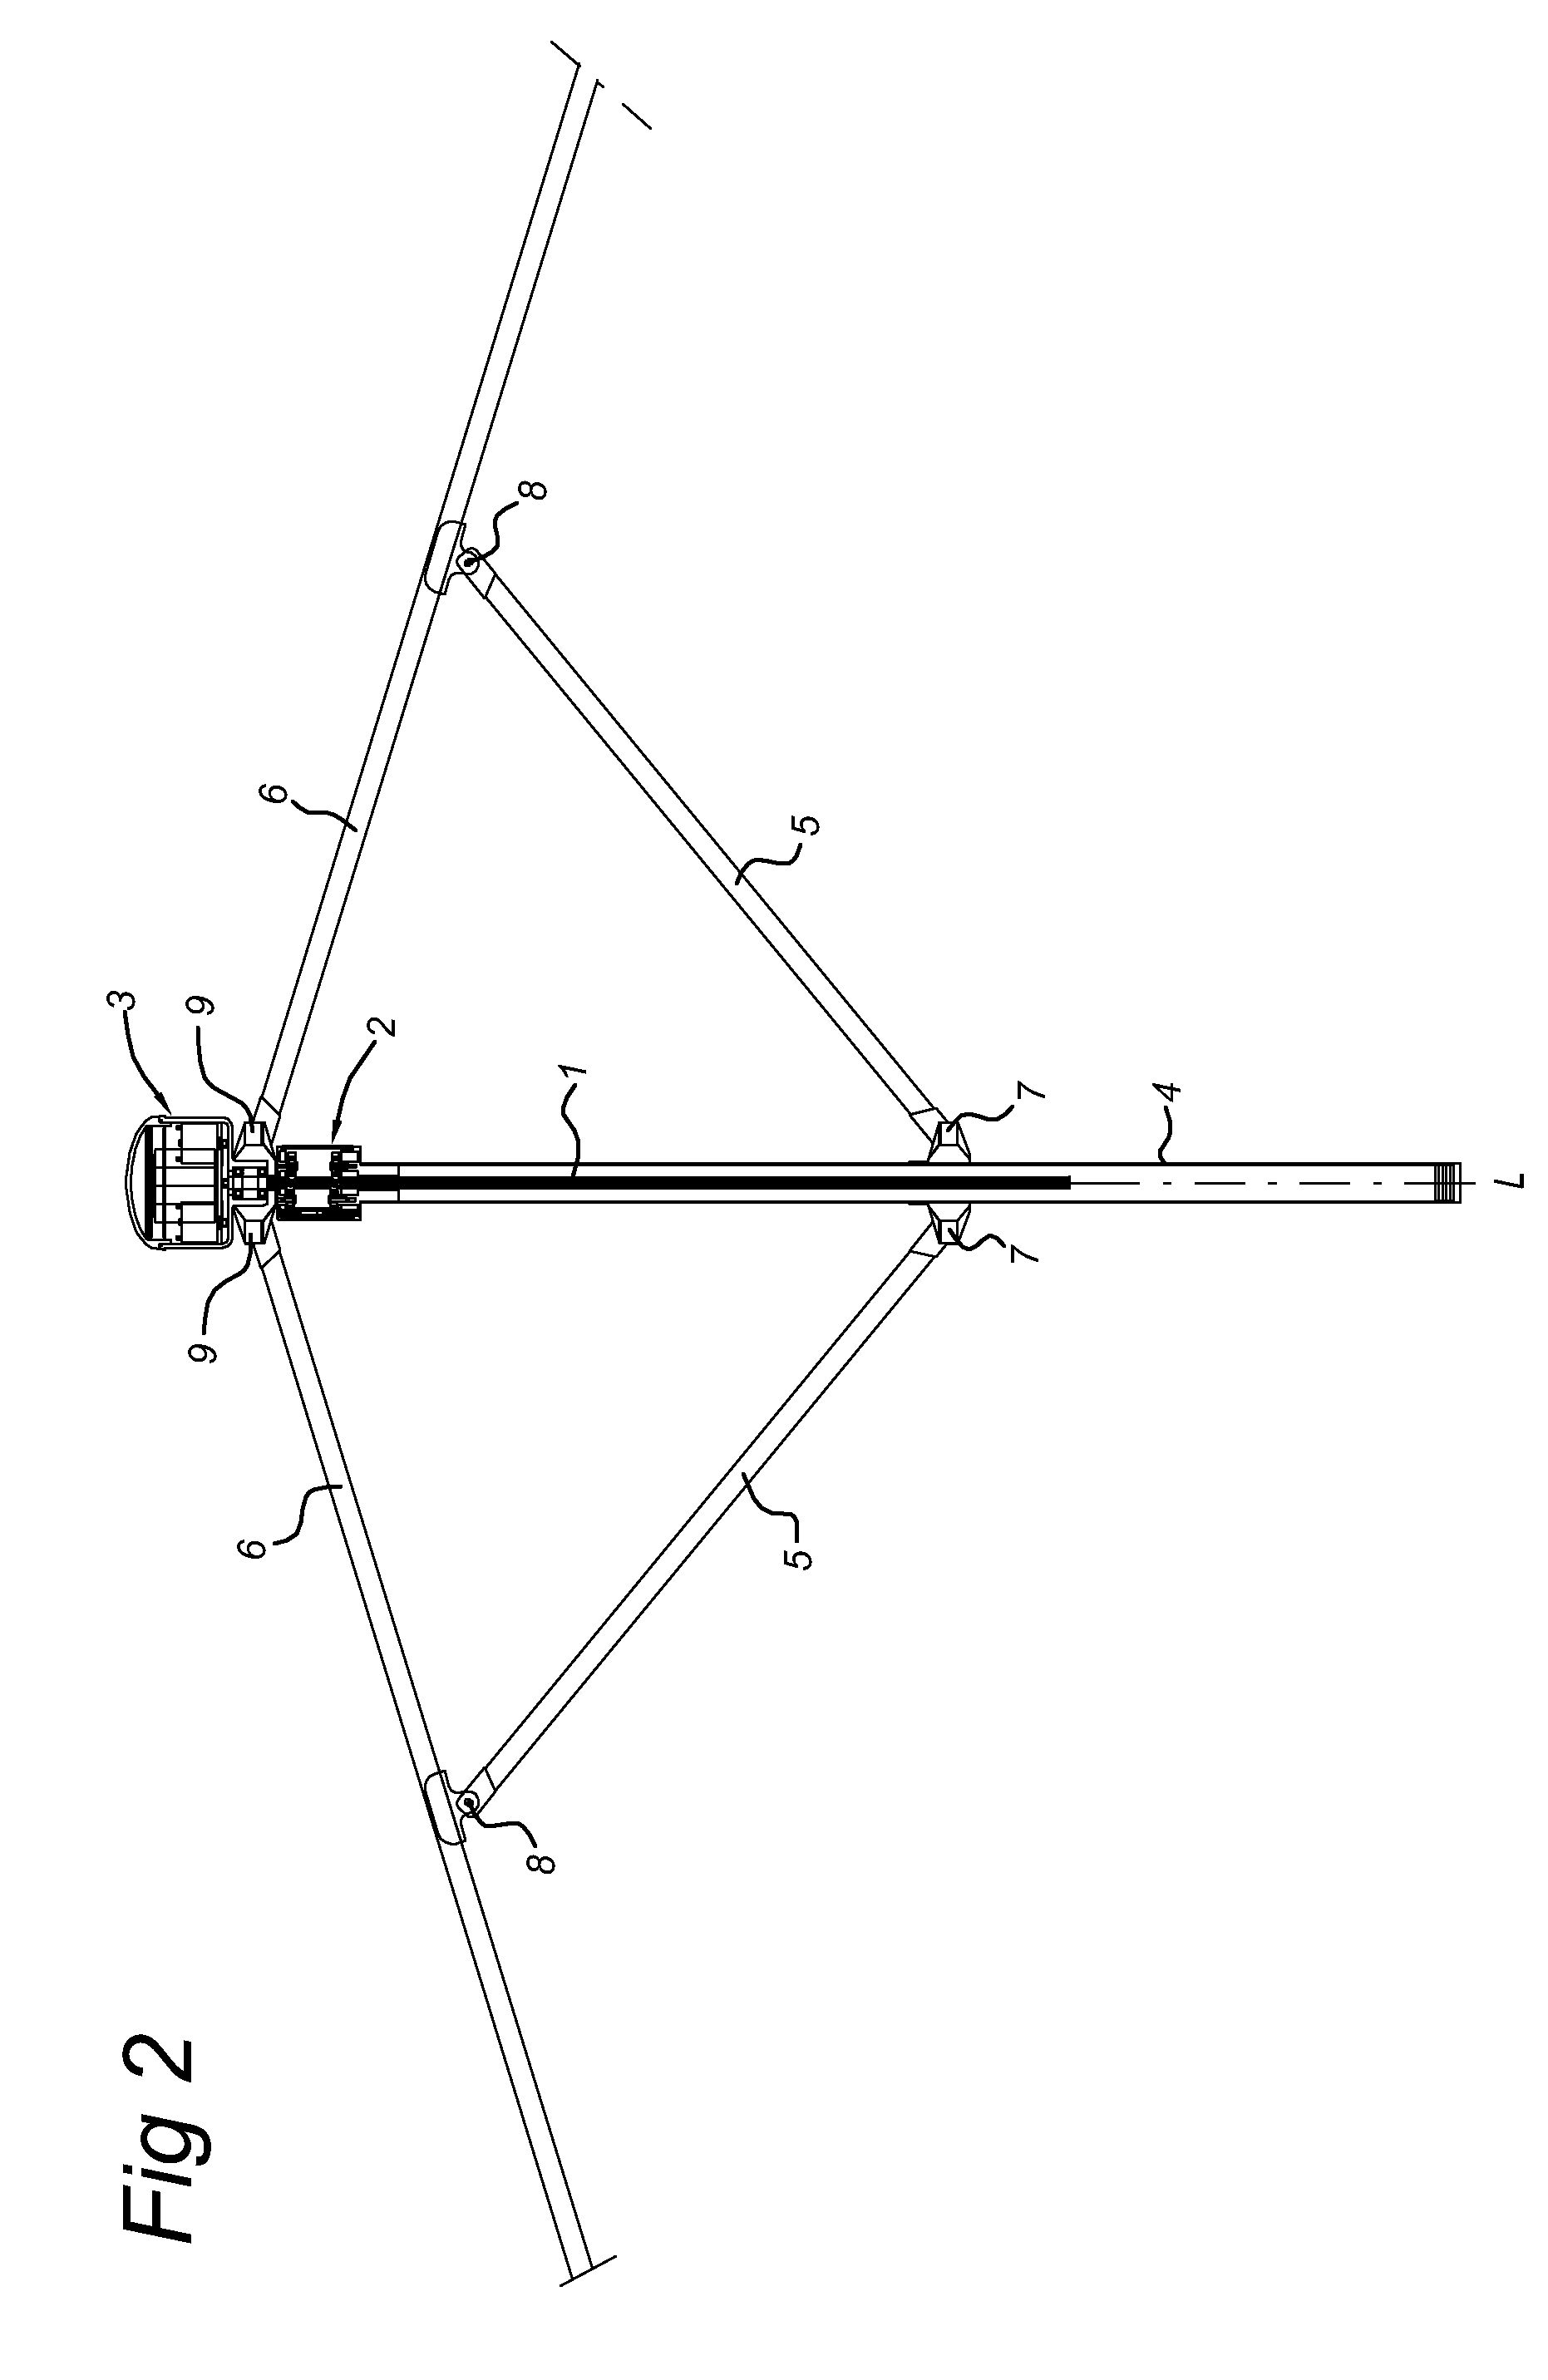 Assembly of a spindle and guide therefor